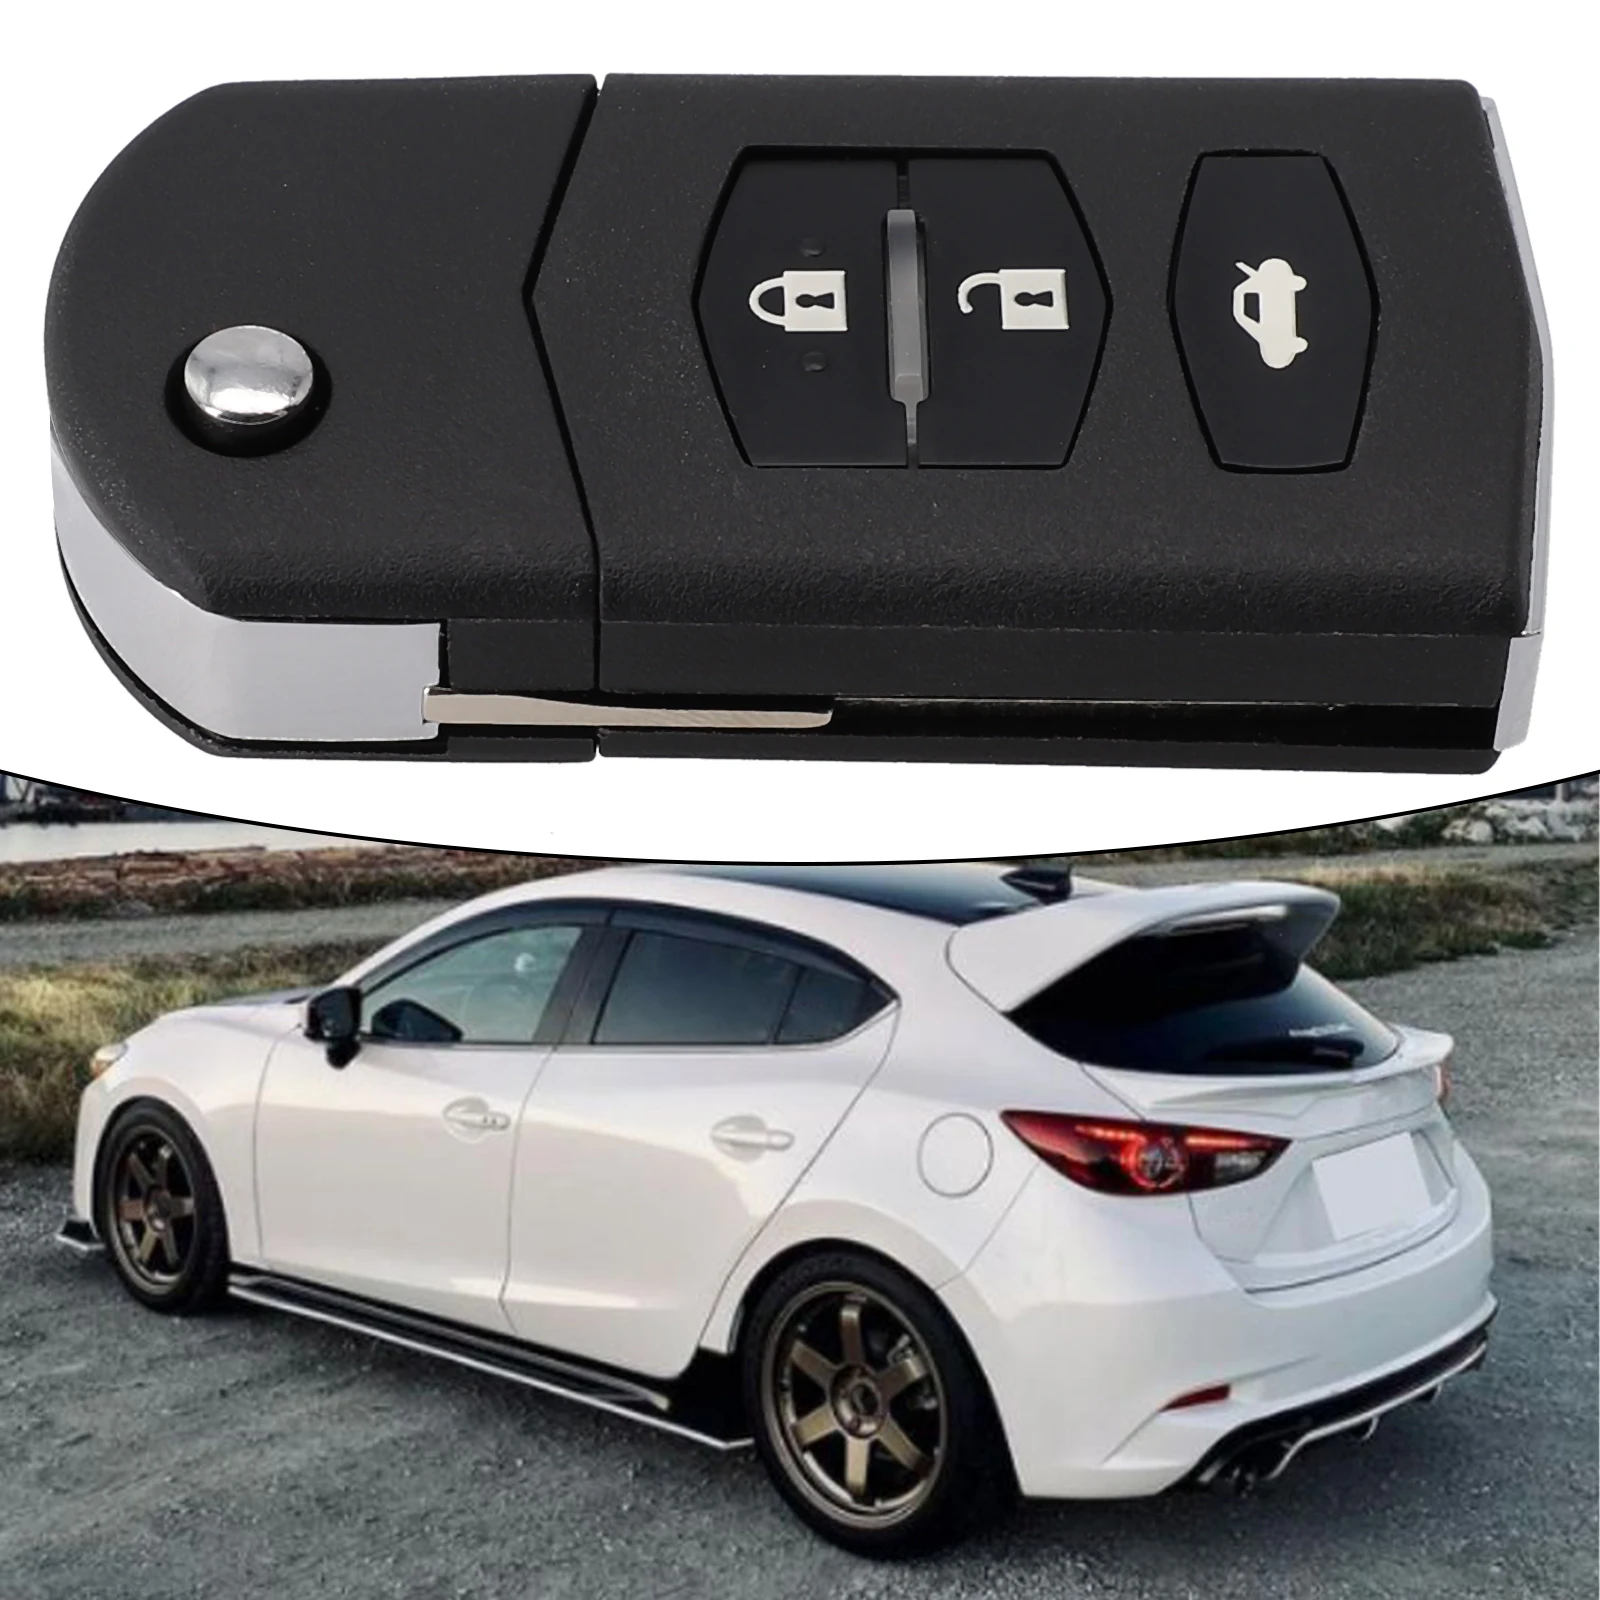 1PCS 3 Buttons Blade Case Car Key Protection Shell CR1620  Battery Flip Fob Suitable For Mazda MX5 RX8 MPV CX7 CX9 Accessories